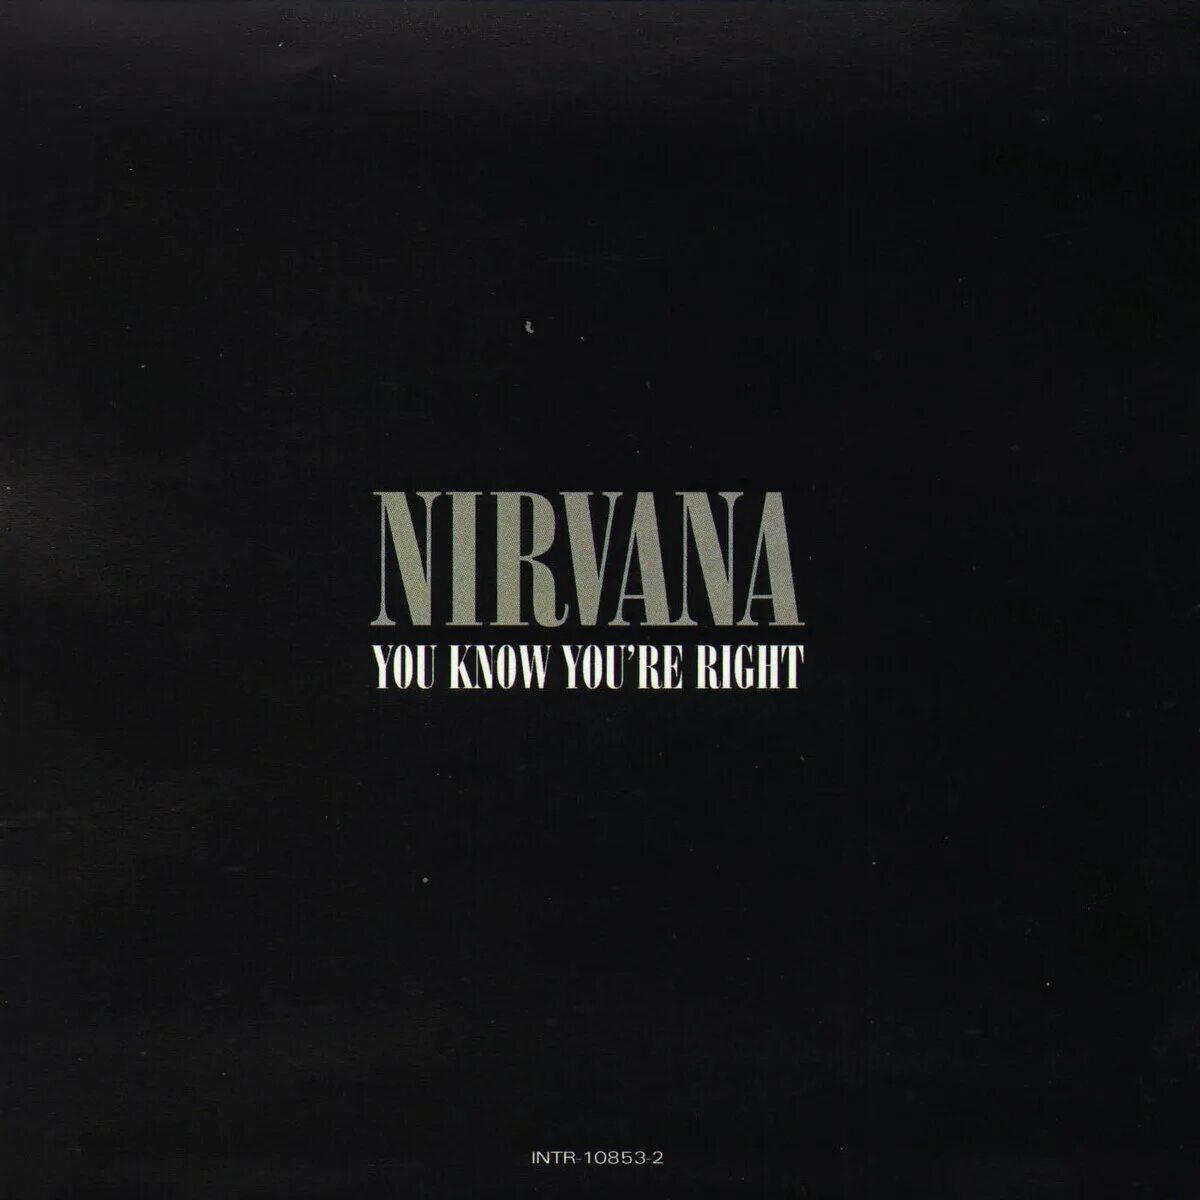 You know you re like it. Nirvana 2002 обложка. Nirvana you know you're right альбом. Nirvana обложки альбомов. Nirvana альбом Nirvana.